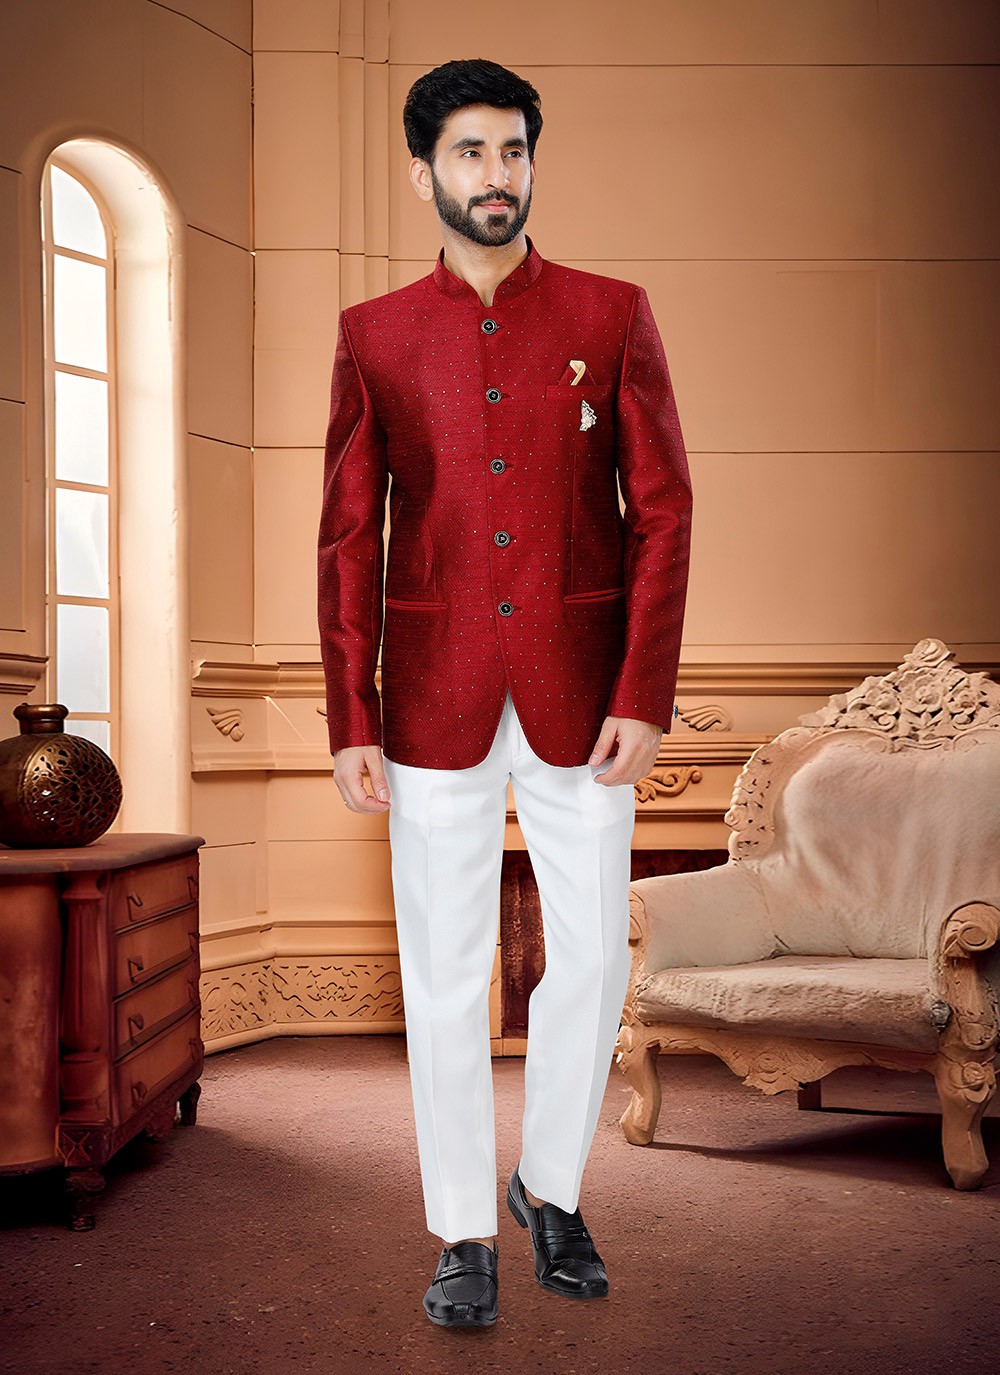 Wholesale gown style suits To Add Class To Every Man's Wardrobe